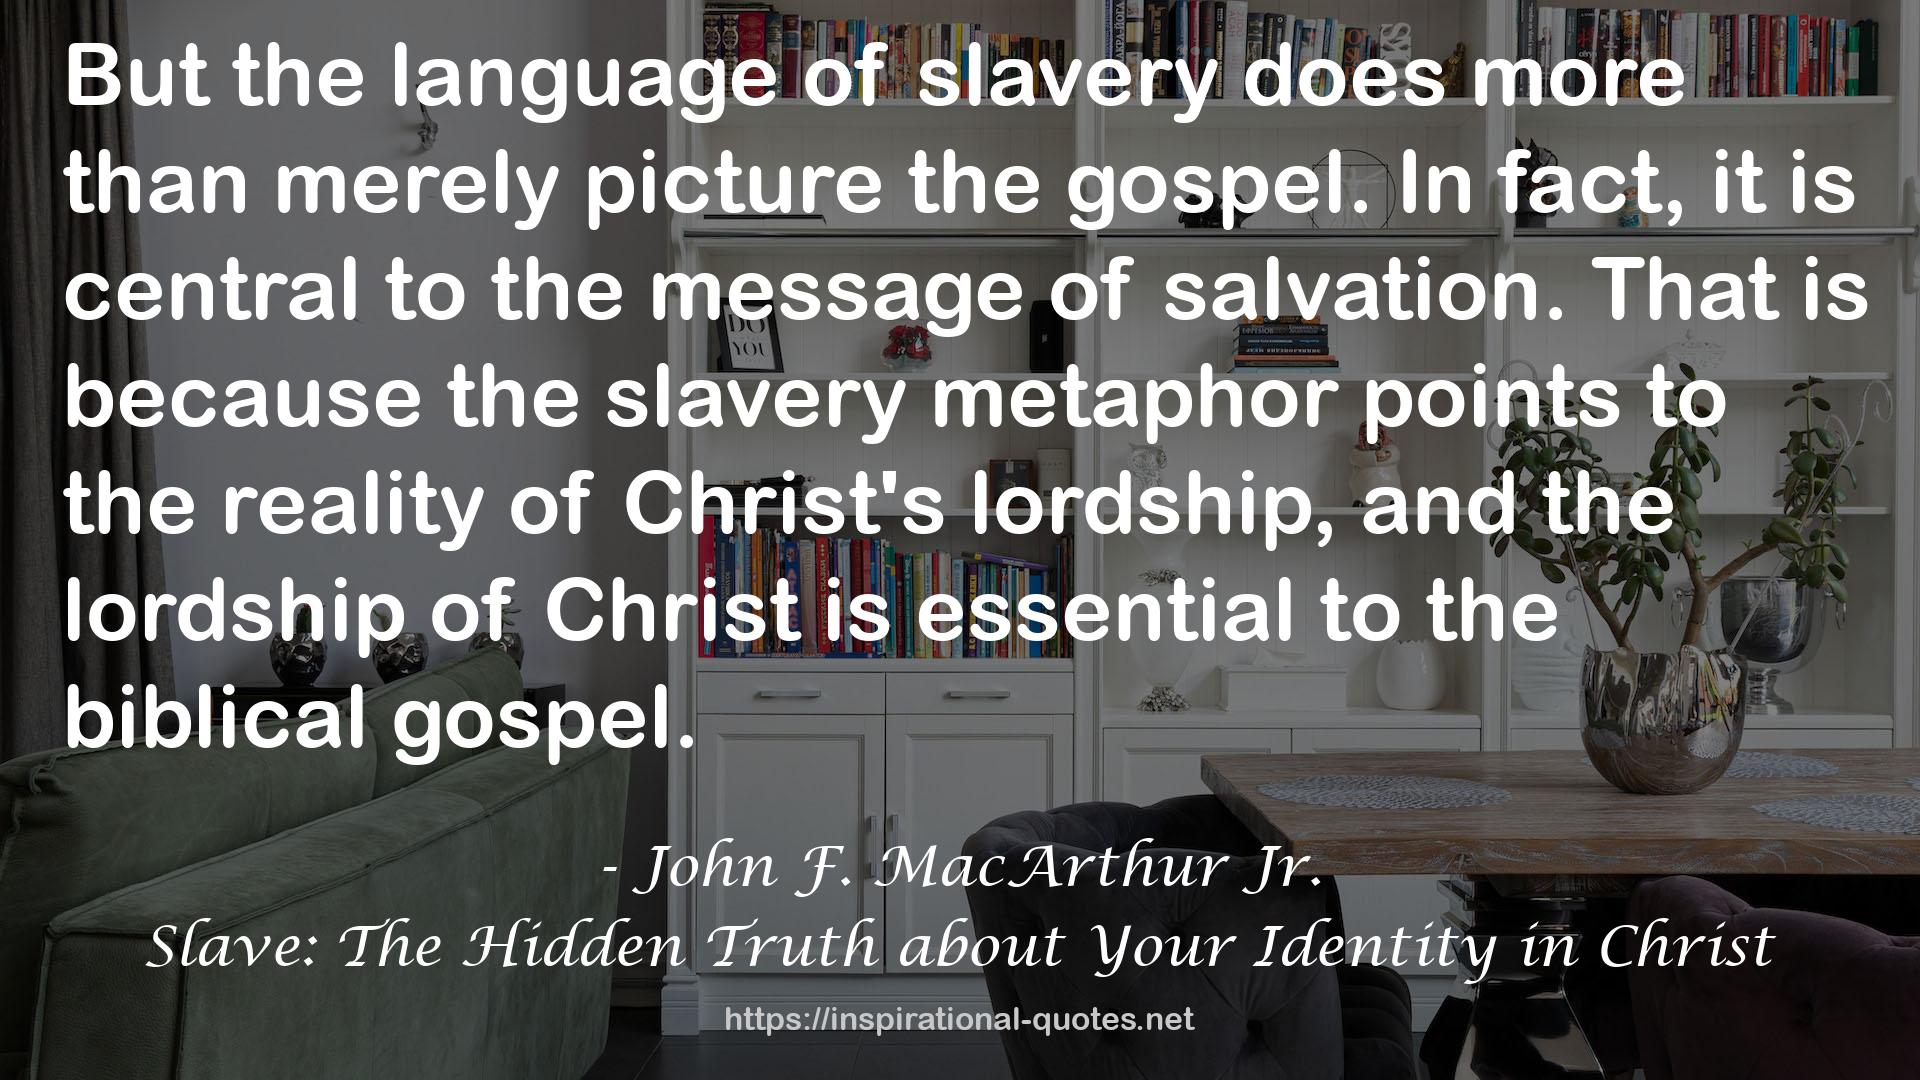 Slave: The Hidden Truth about Your Identity in Christ QUOTES